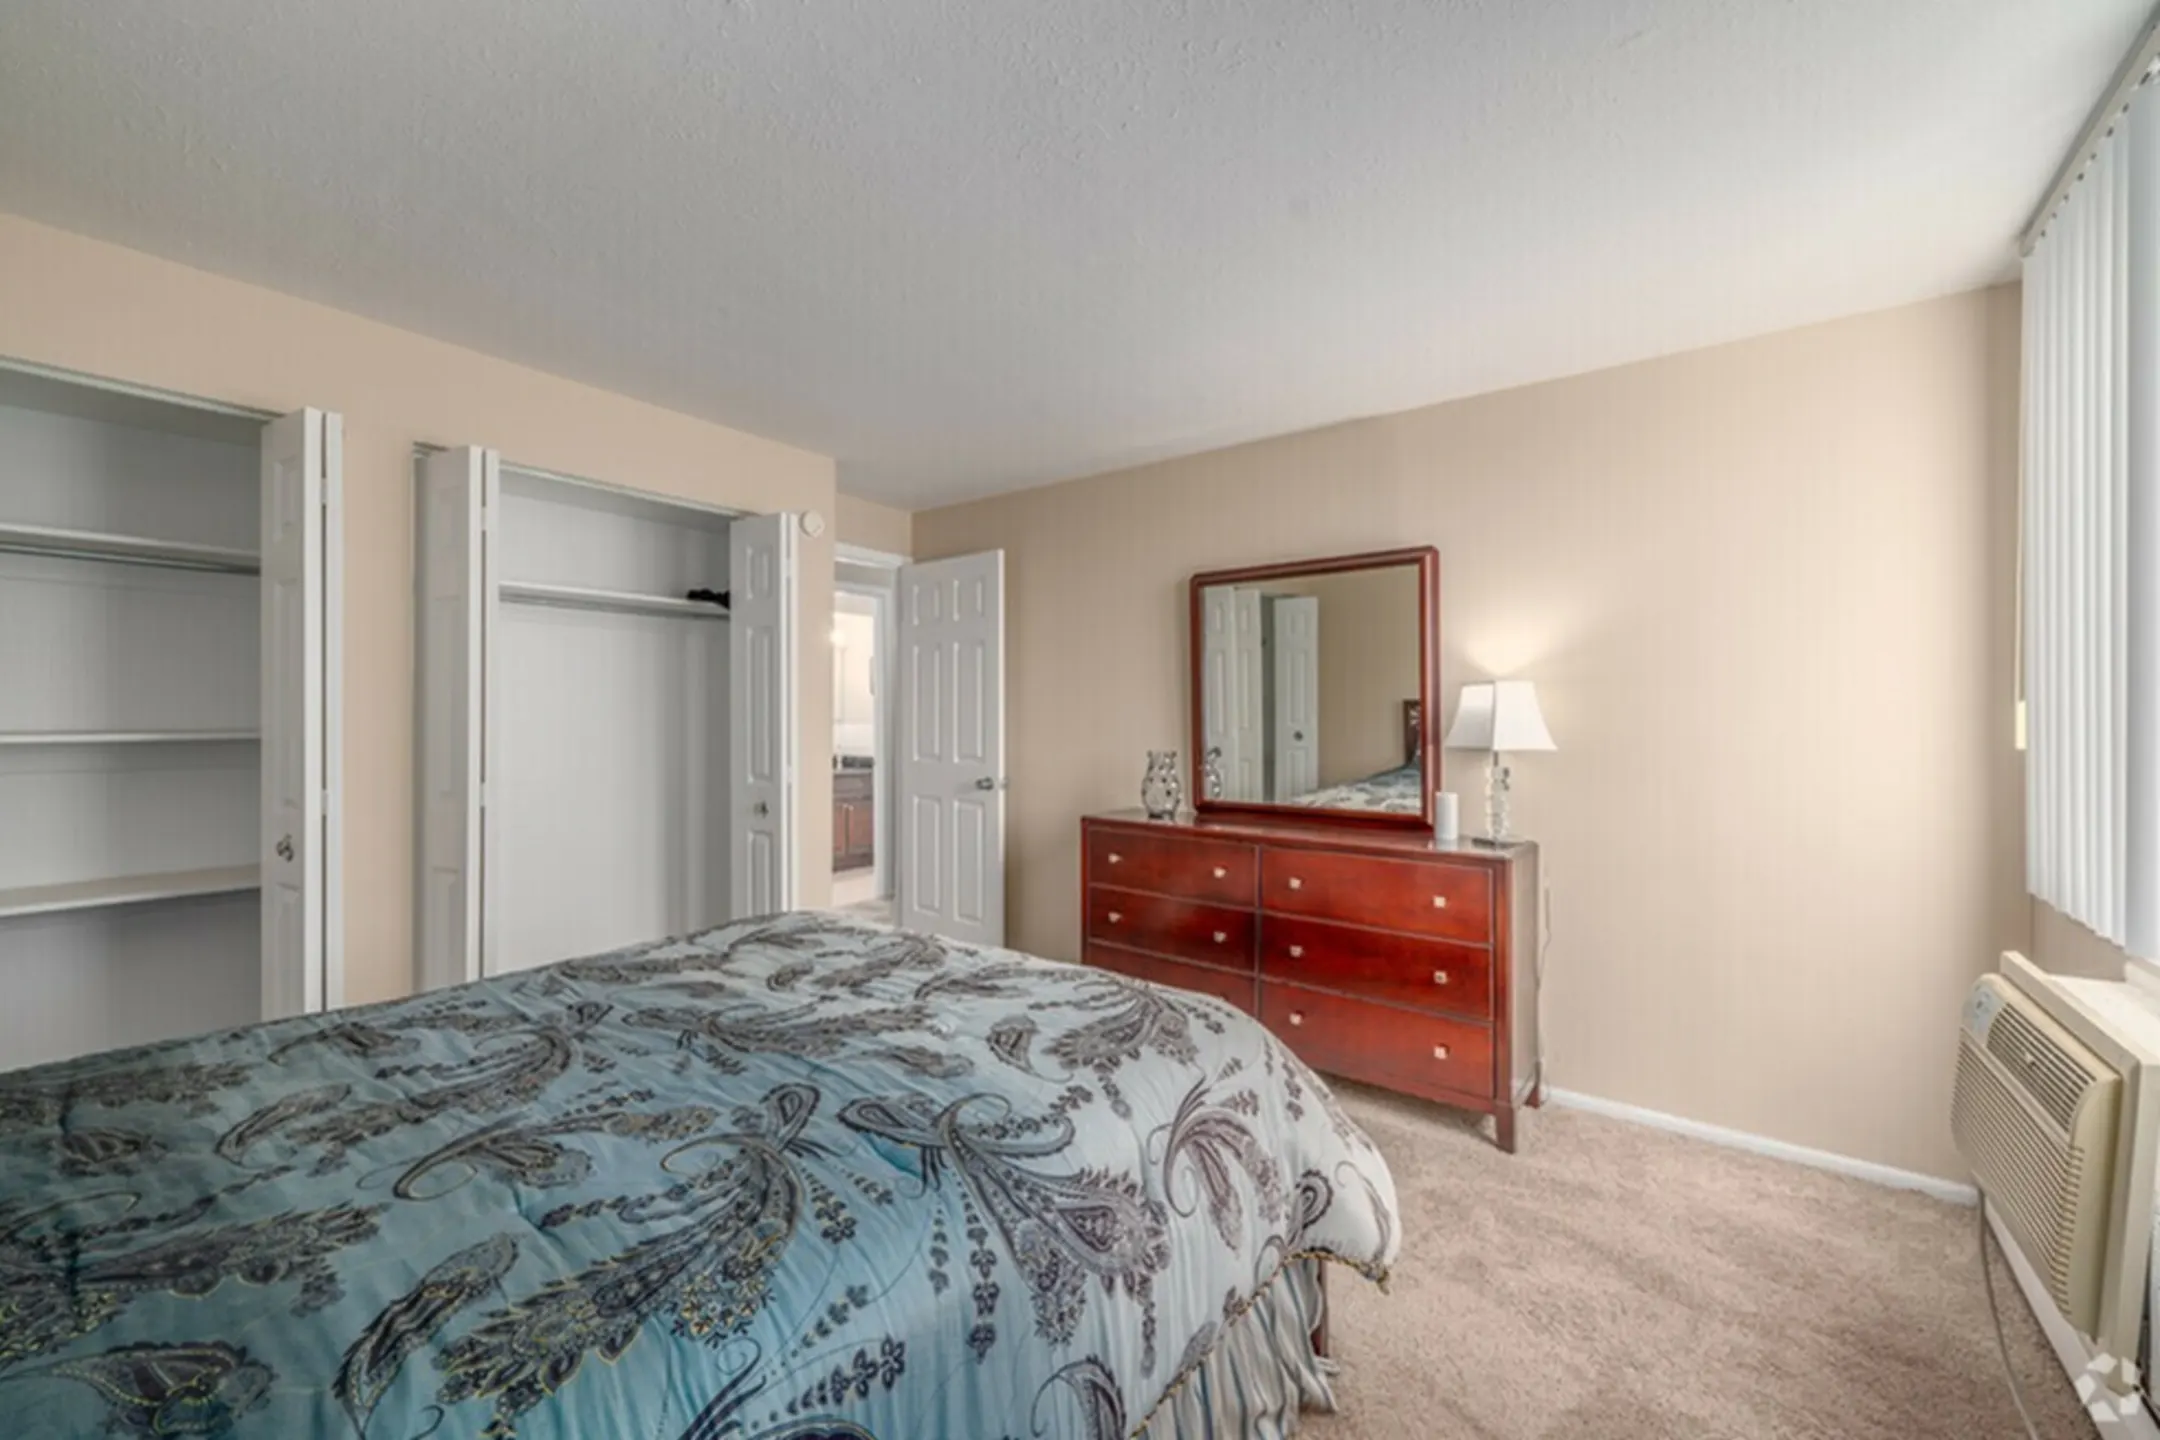 Bedroom - The Westbury - North Olmsted, OH